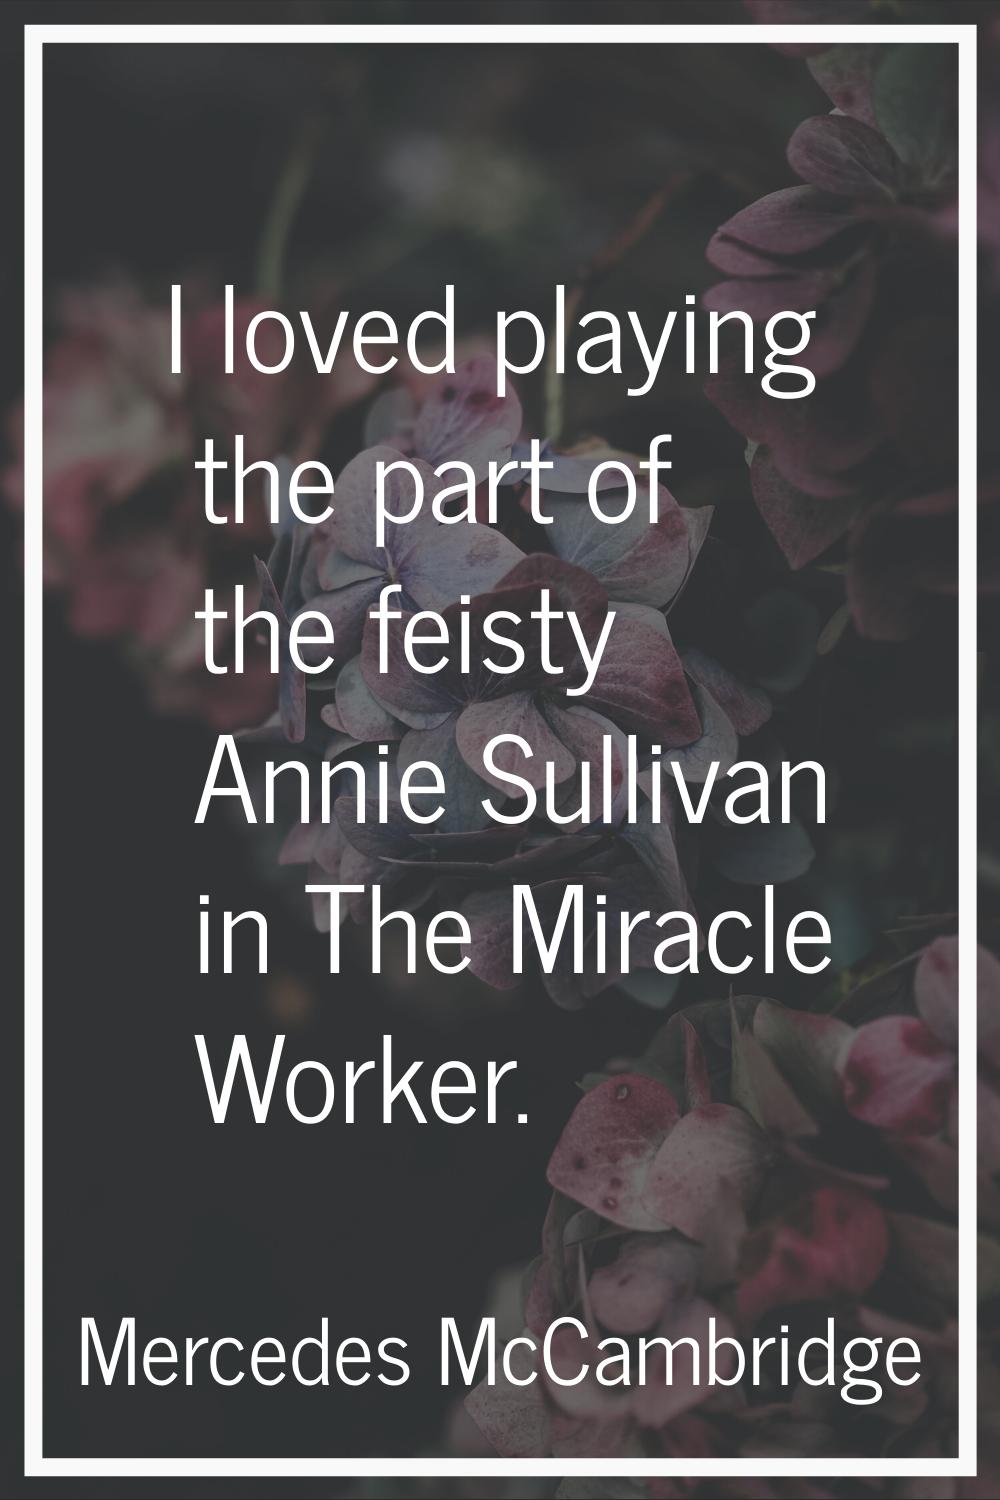 I loved playing the part of the feisty Annie Sullivan in The Miracle Worker.